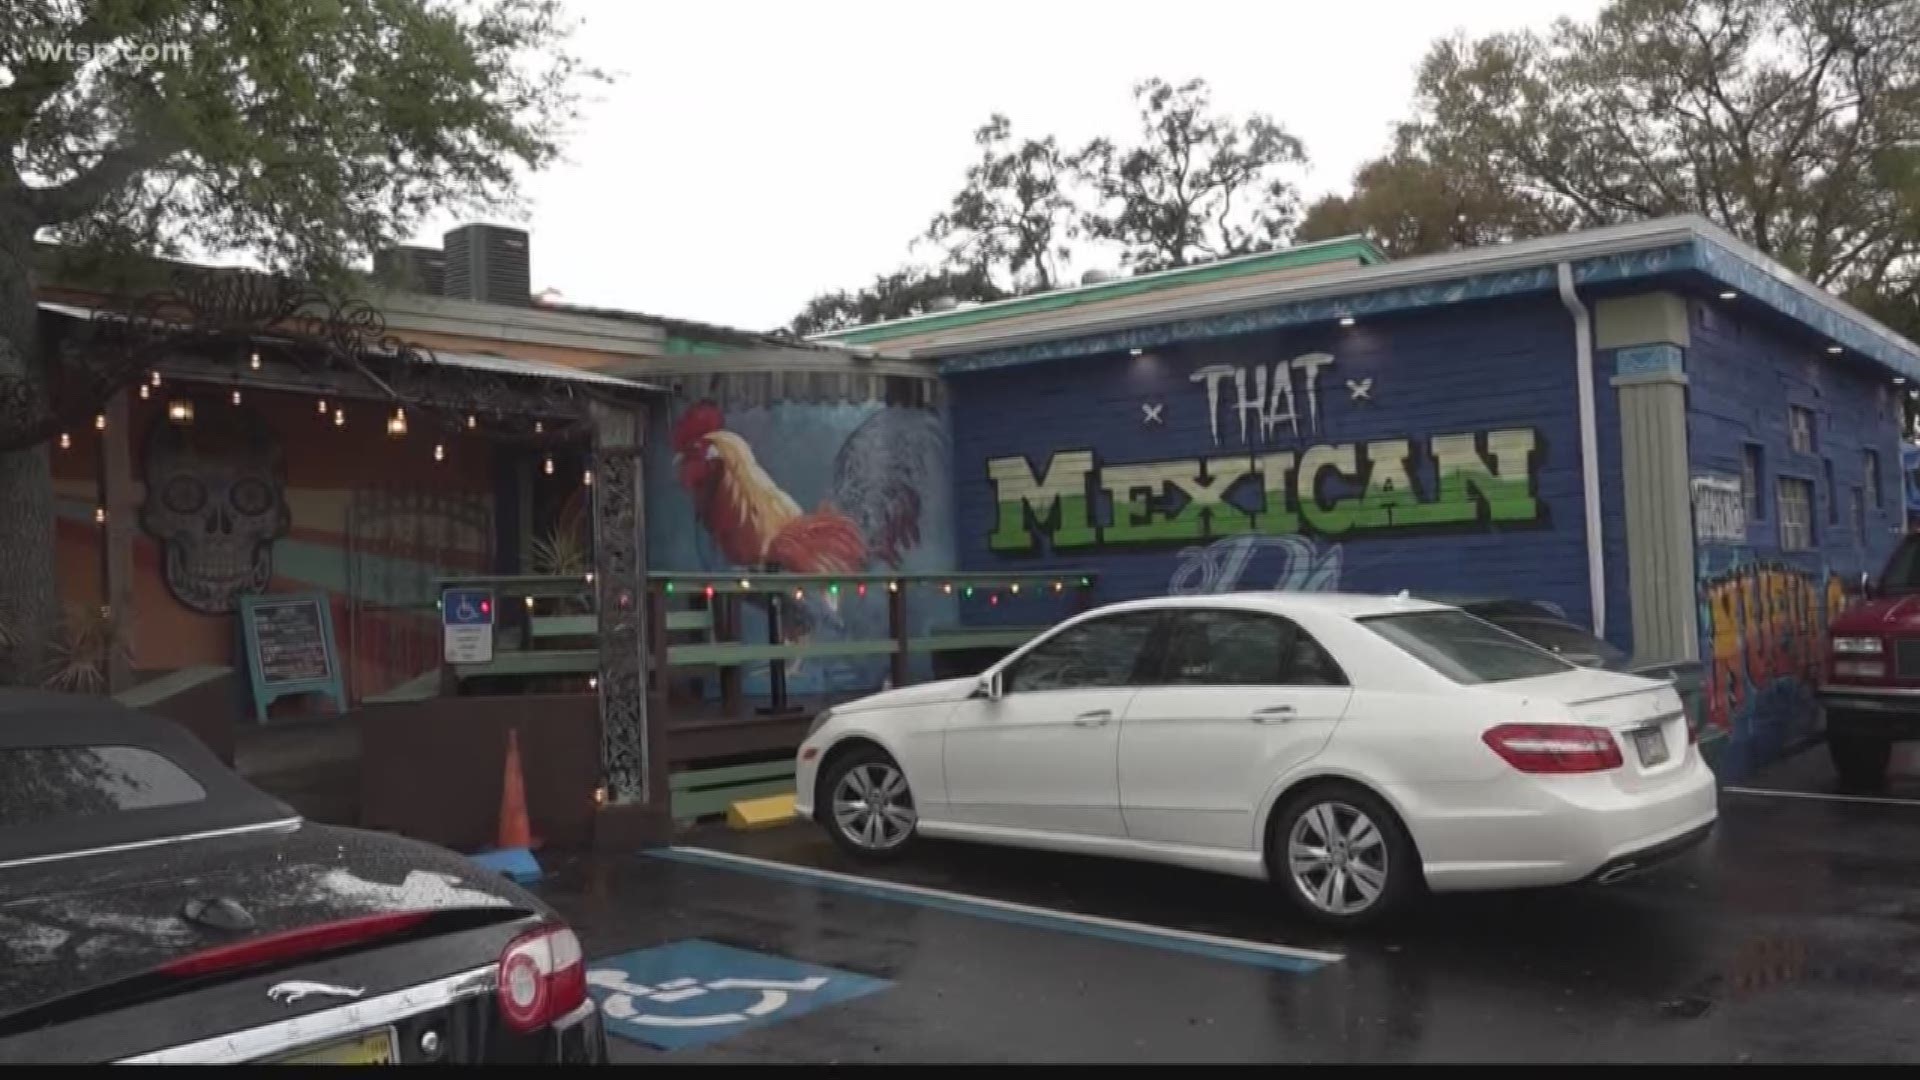 Customers from all over head to Nueva Cantina for their amazing Mexican. However, health inspectors wrote the restaurant up for 31 violations last week.